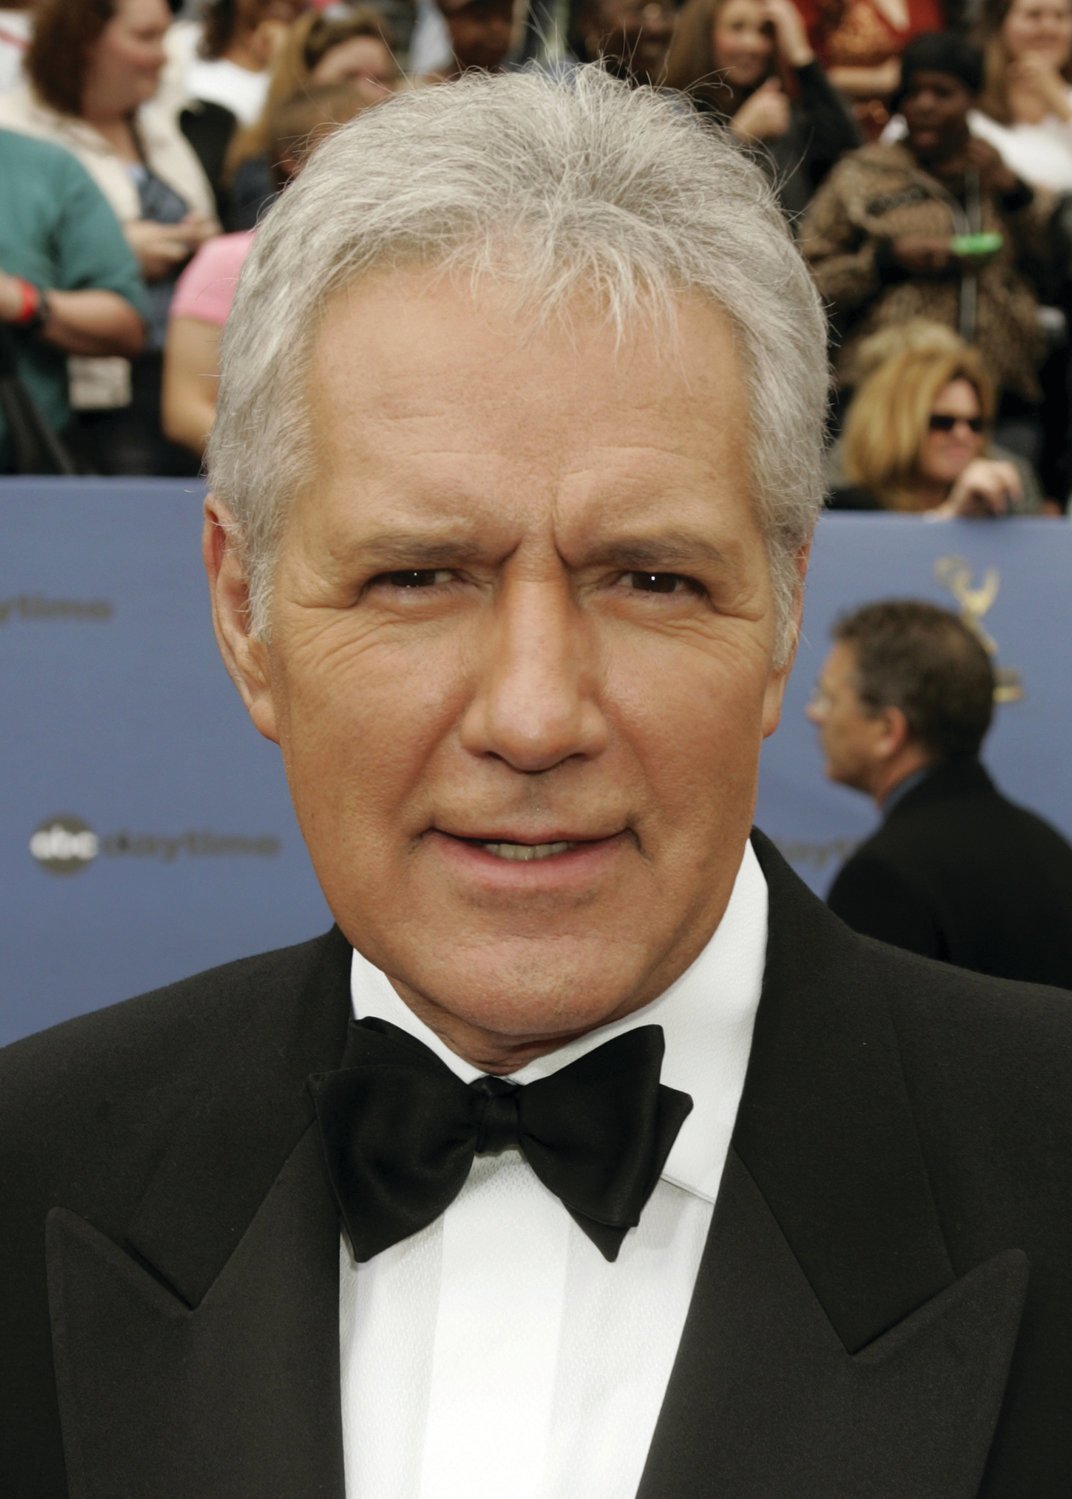 Alex Trebek, host of the game show "Jeopardy," is seen in this 2006 file photo. He died Nov. 8, 2020, from complications related to pancreatic cancer. He was 80. (CNS photo/Fred Prouser, Reuters)